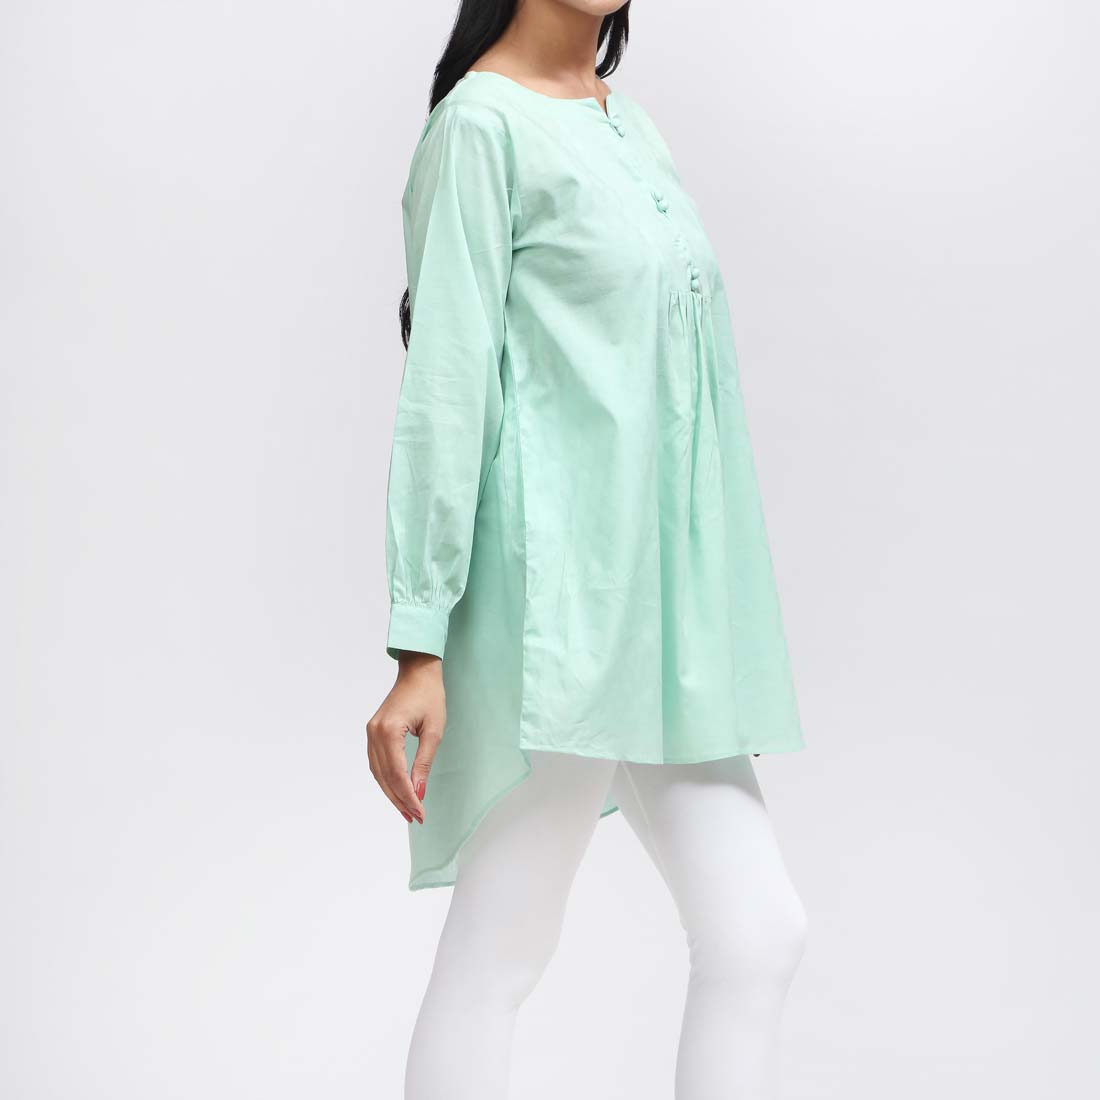 1PC- Solid Dobby Cotton Top PW9099